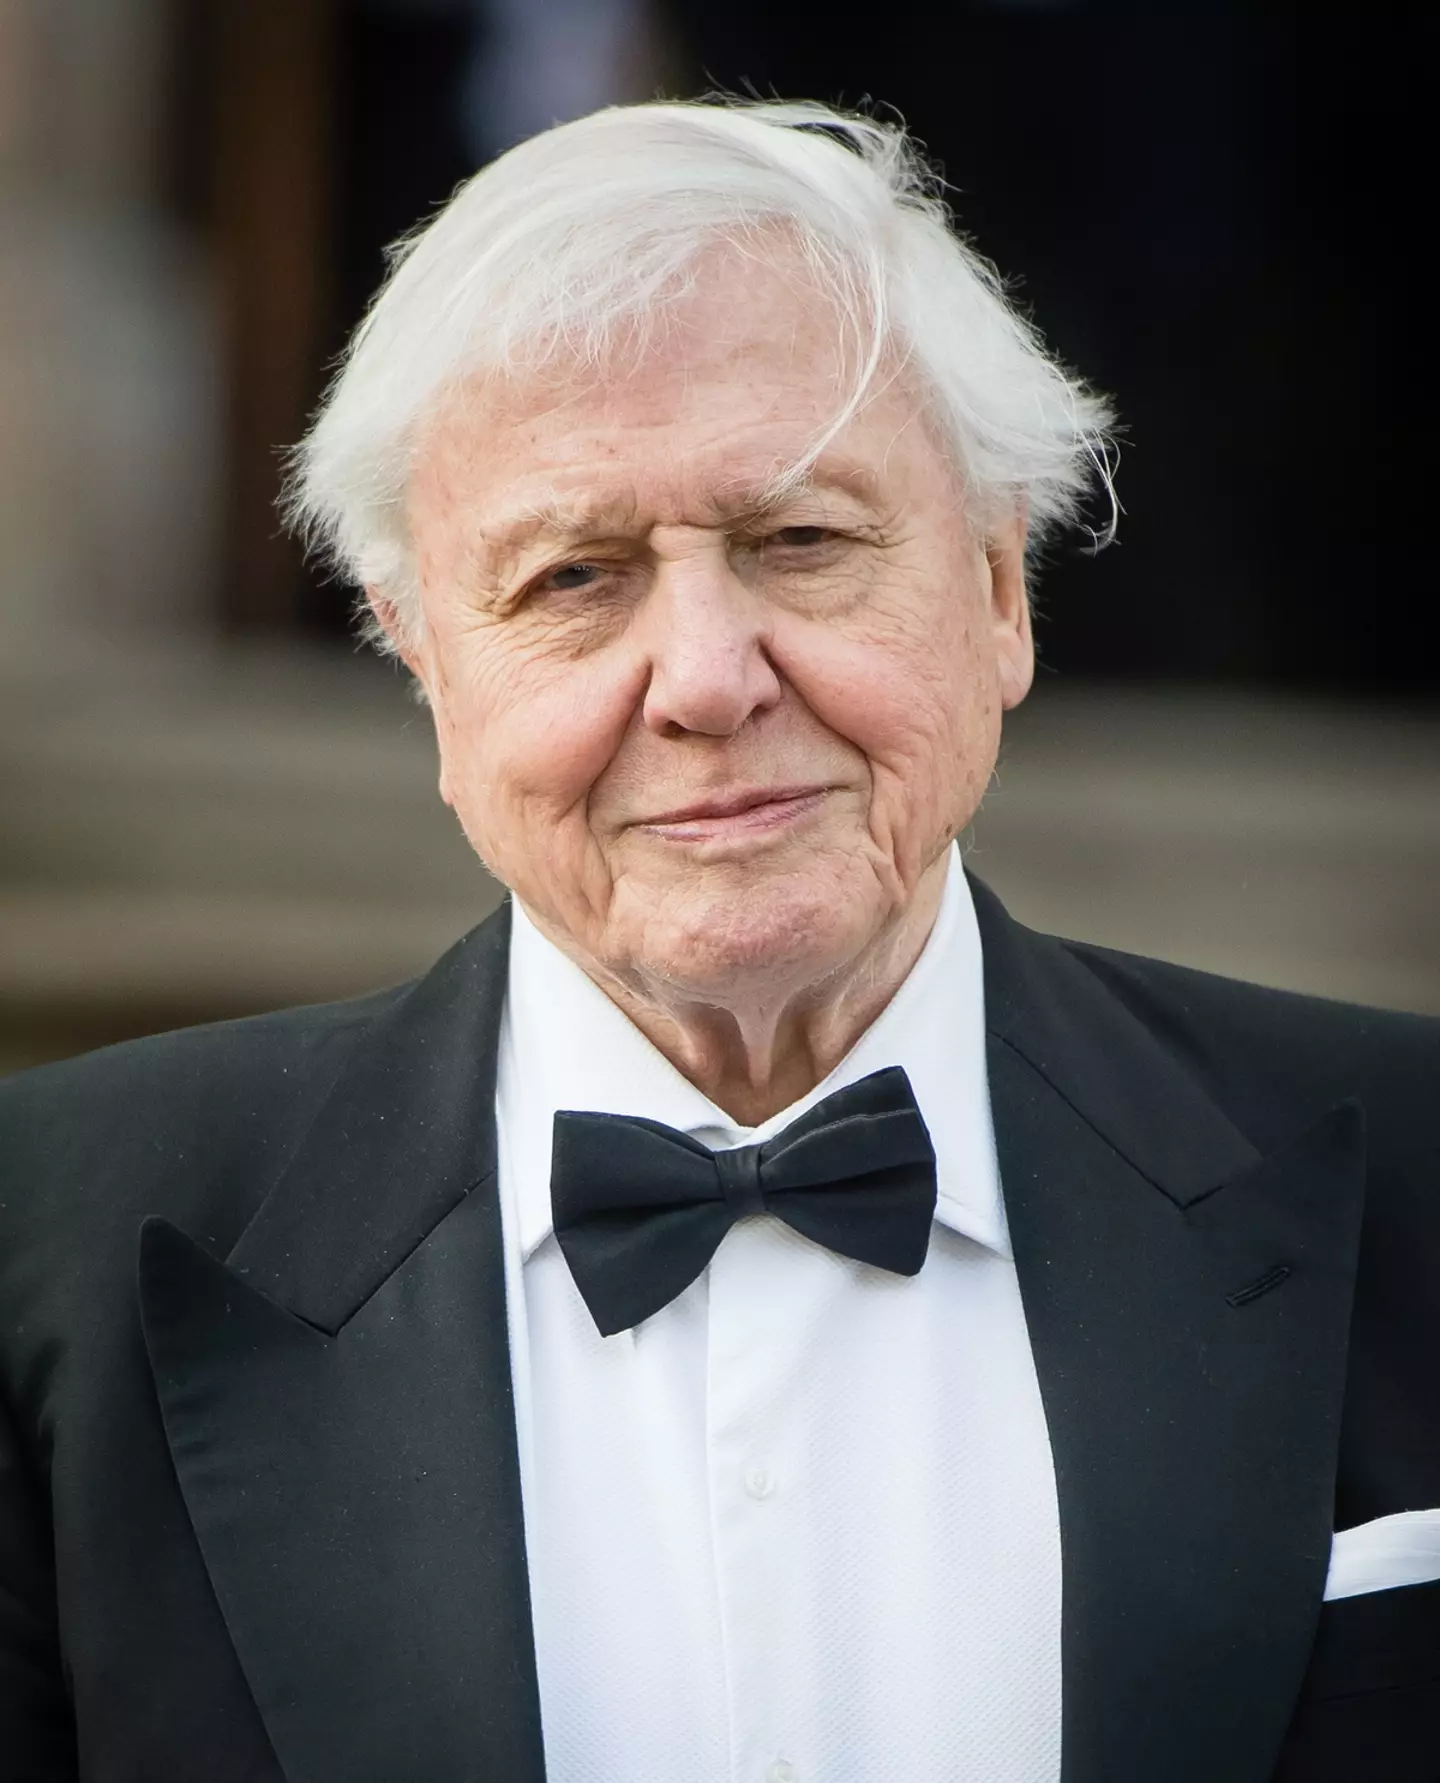 Sir David Attenborough has always stood firm on his stance of not intervening with nature.